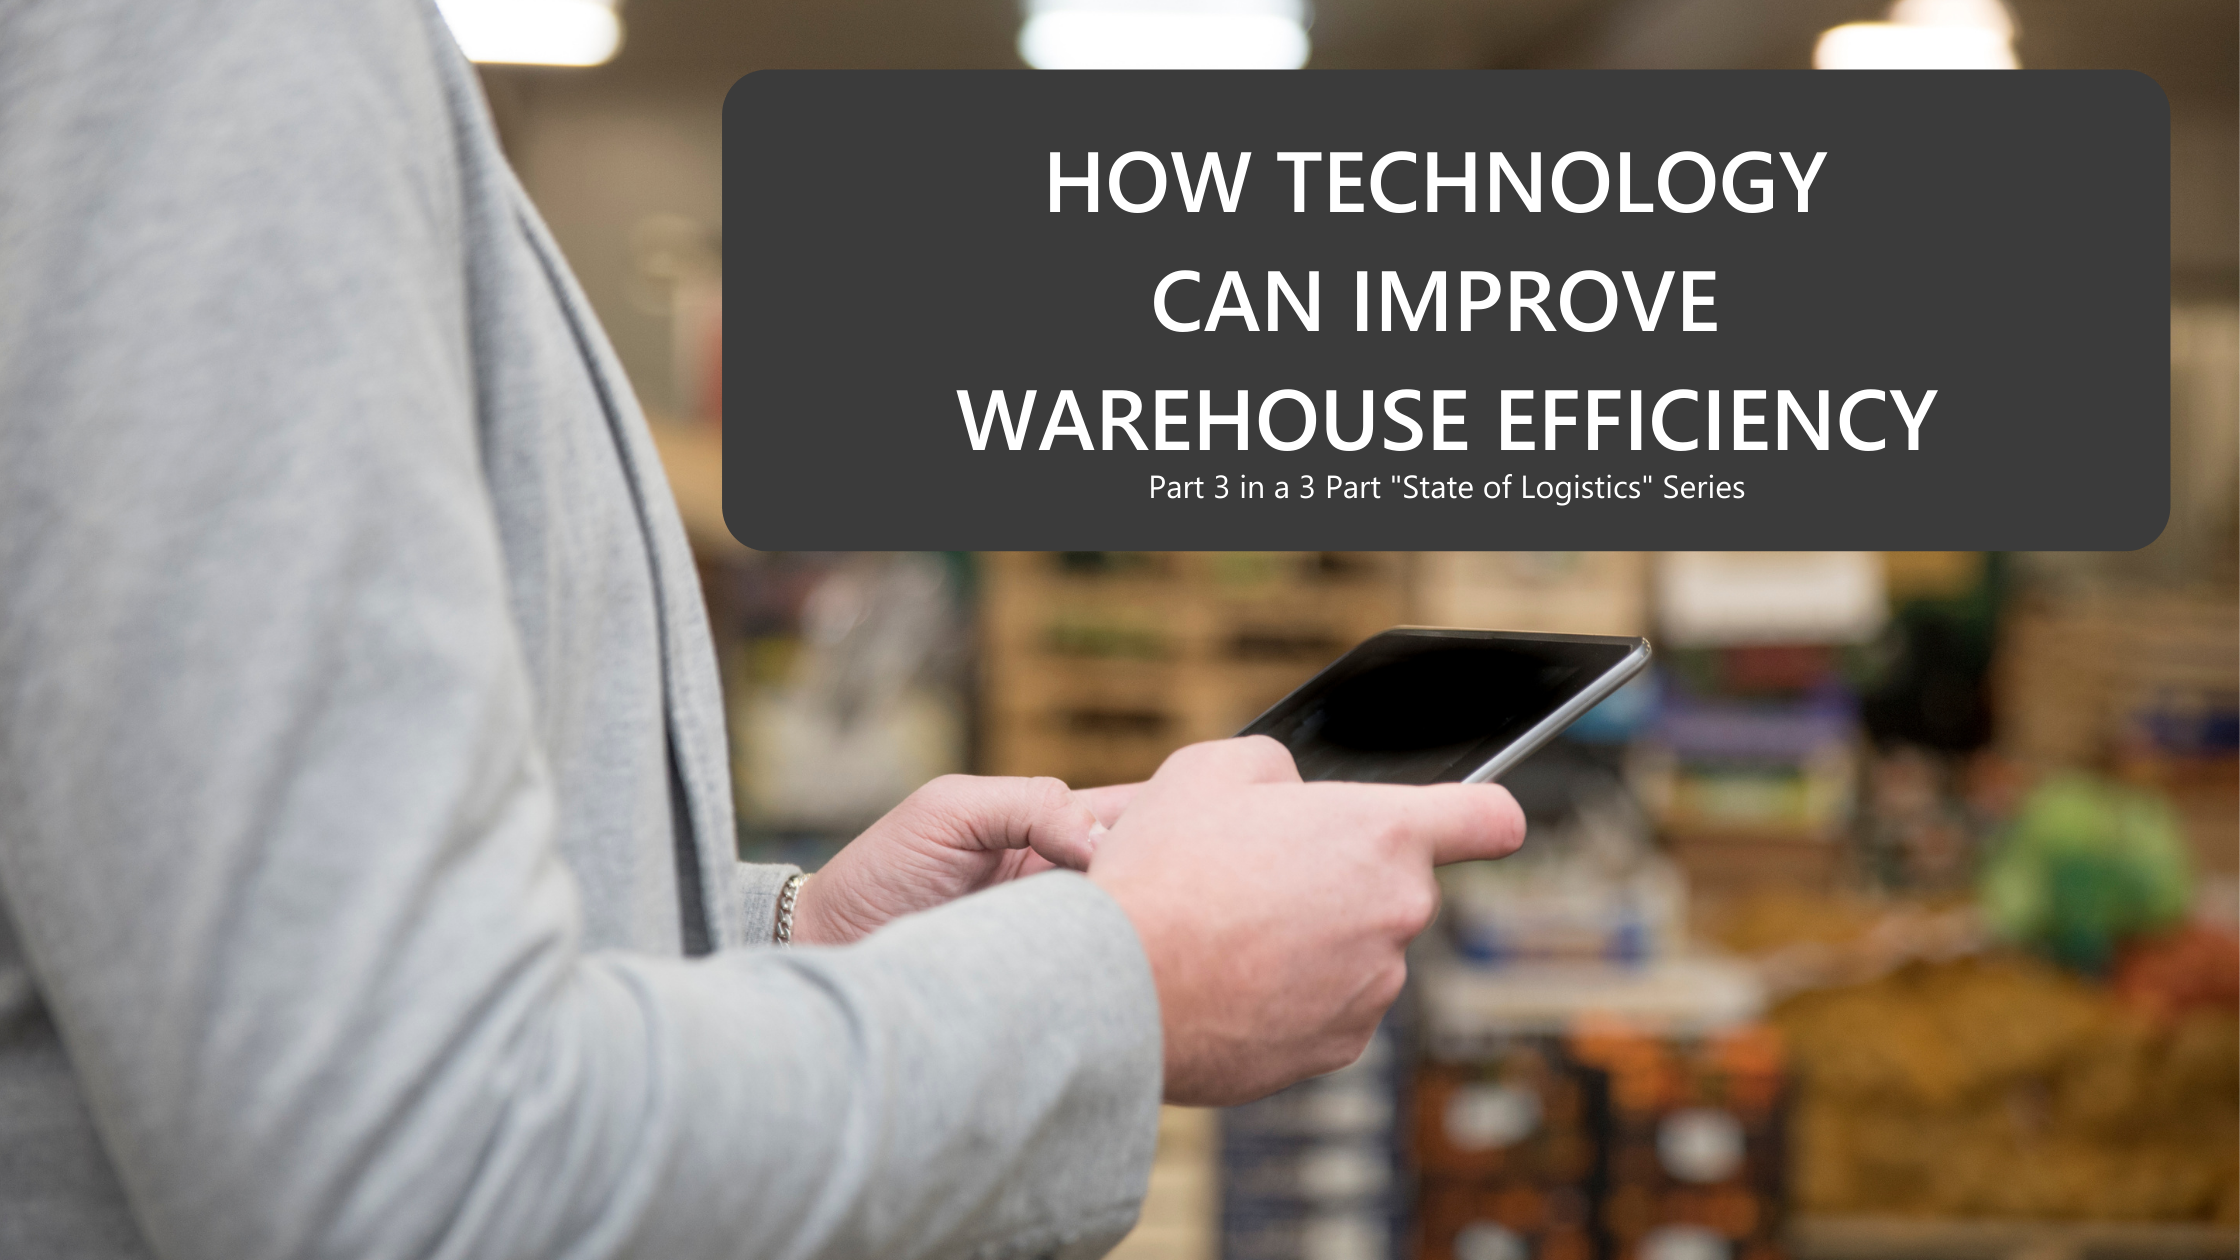 HOW TECHNOLOGY CAN IMPROVE WAREHOUSE EFFICIENCY